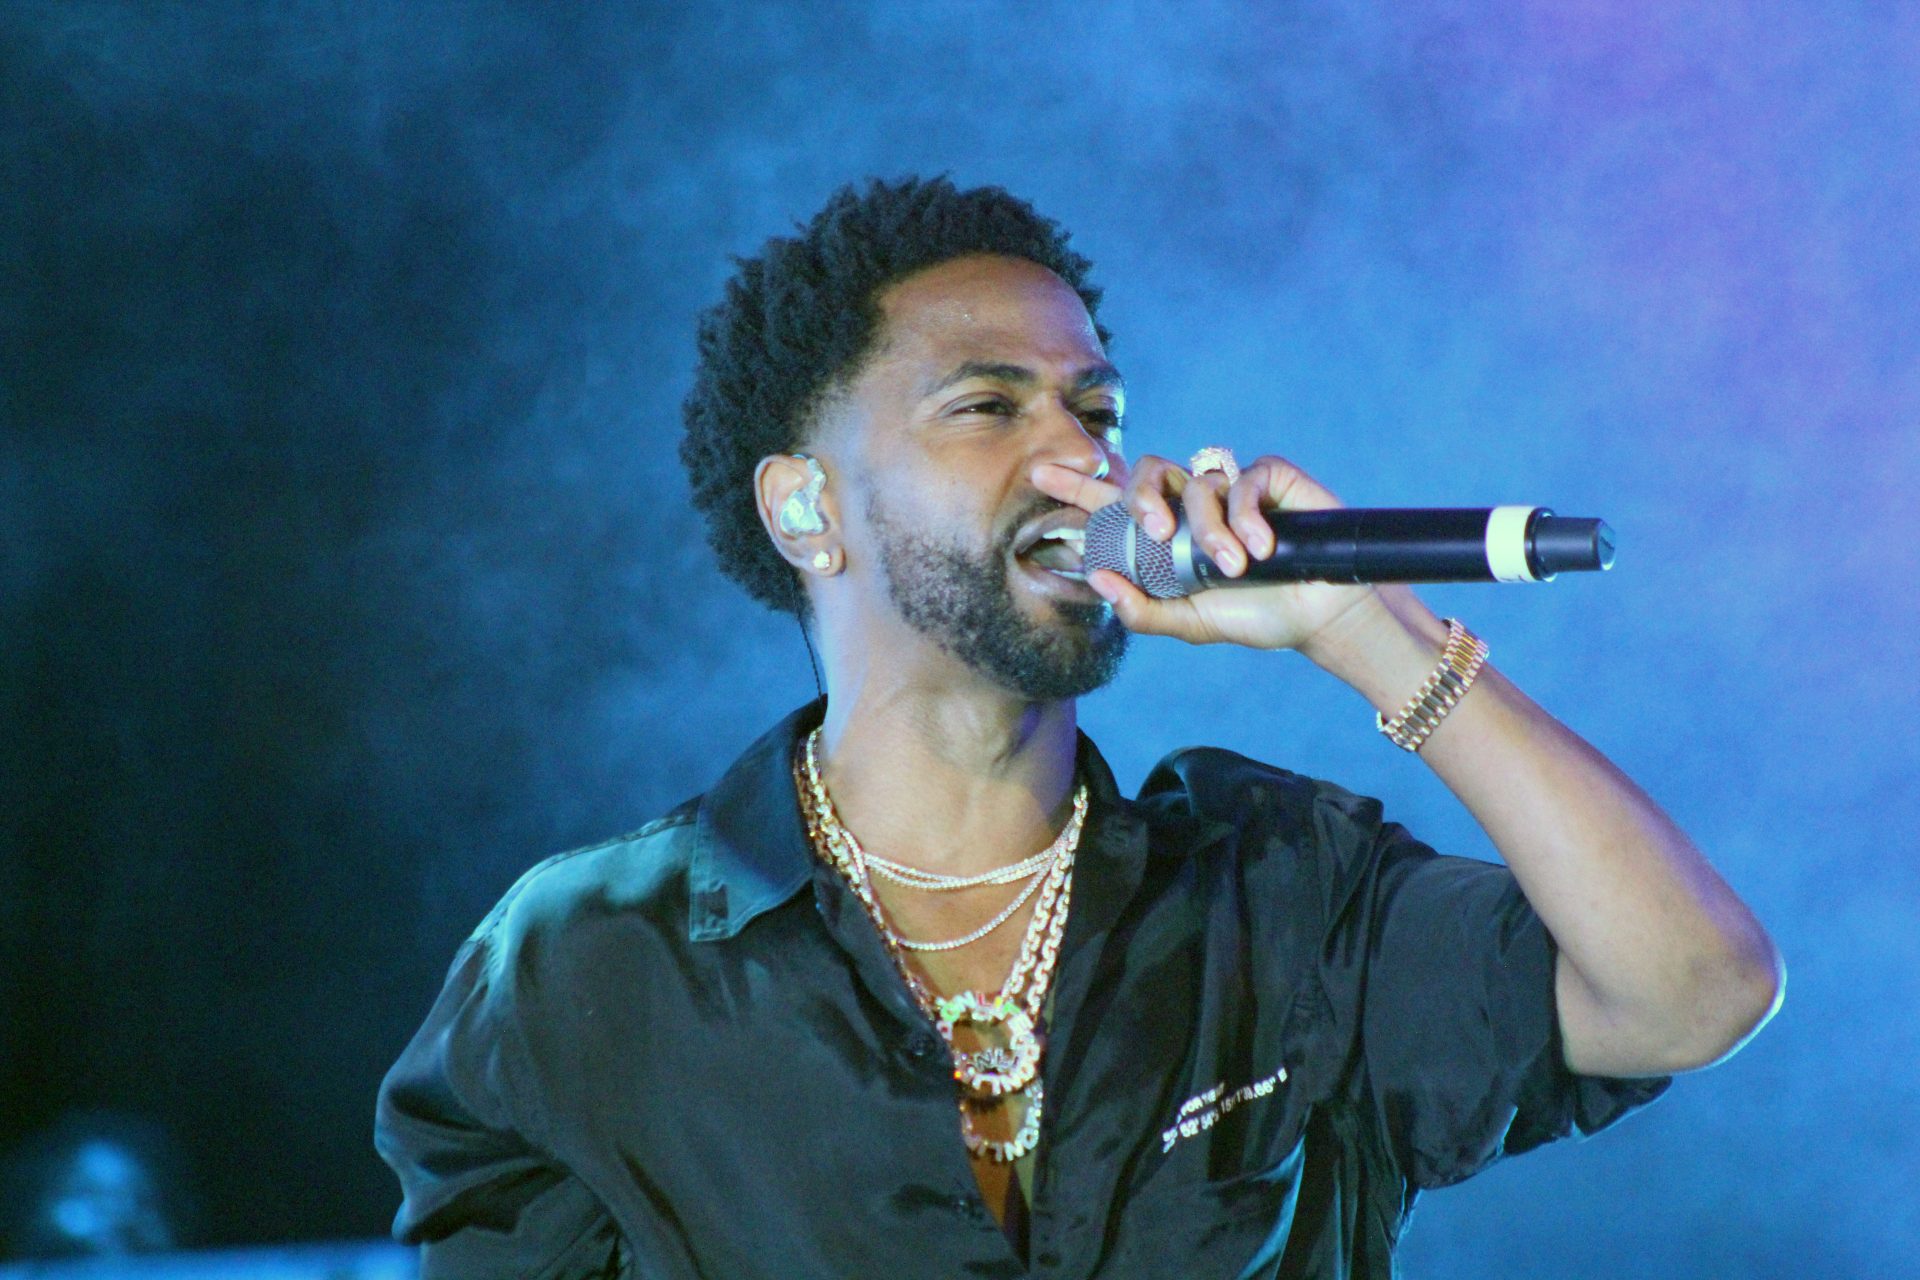 Big Sean and Trey Songz show how it's done at WGCI's Summer Jam